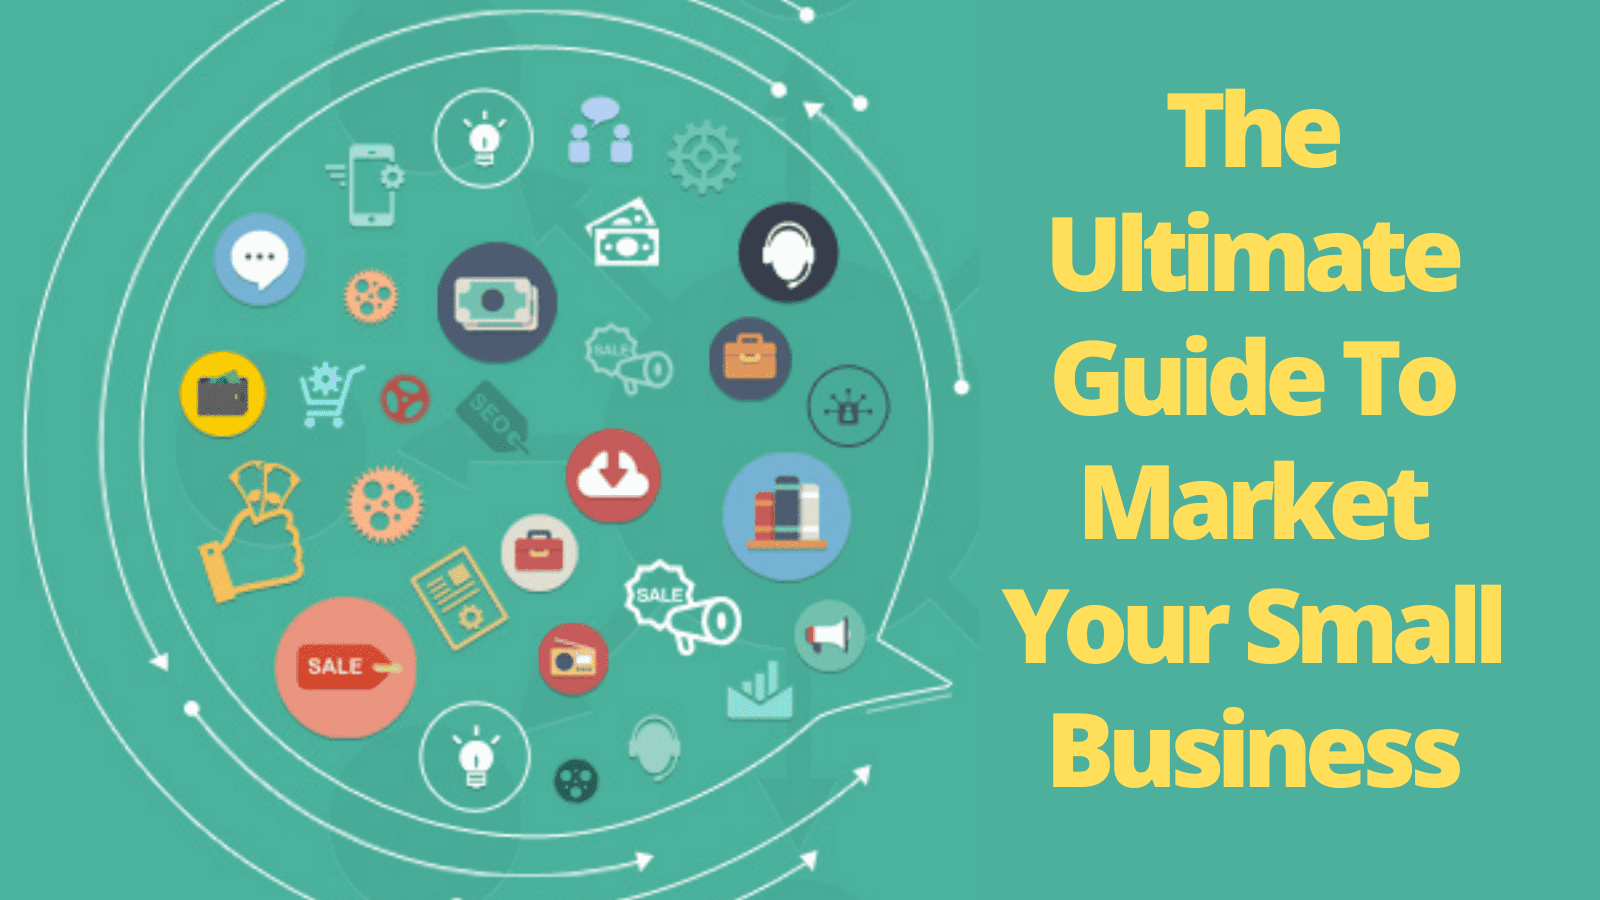 The Ultimate Guide To Small Business Marketing